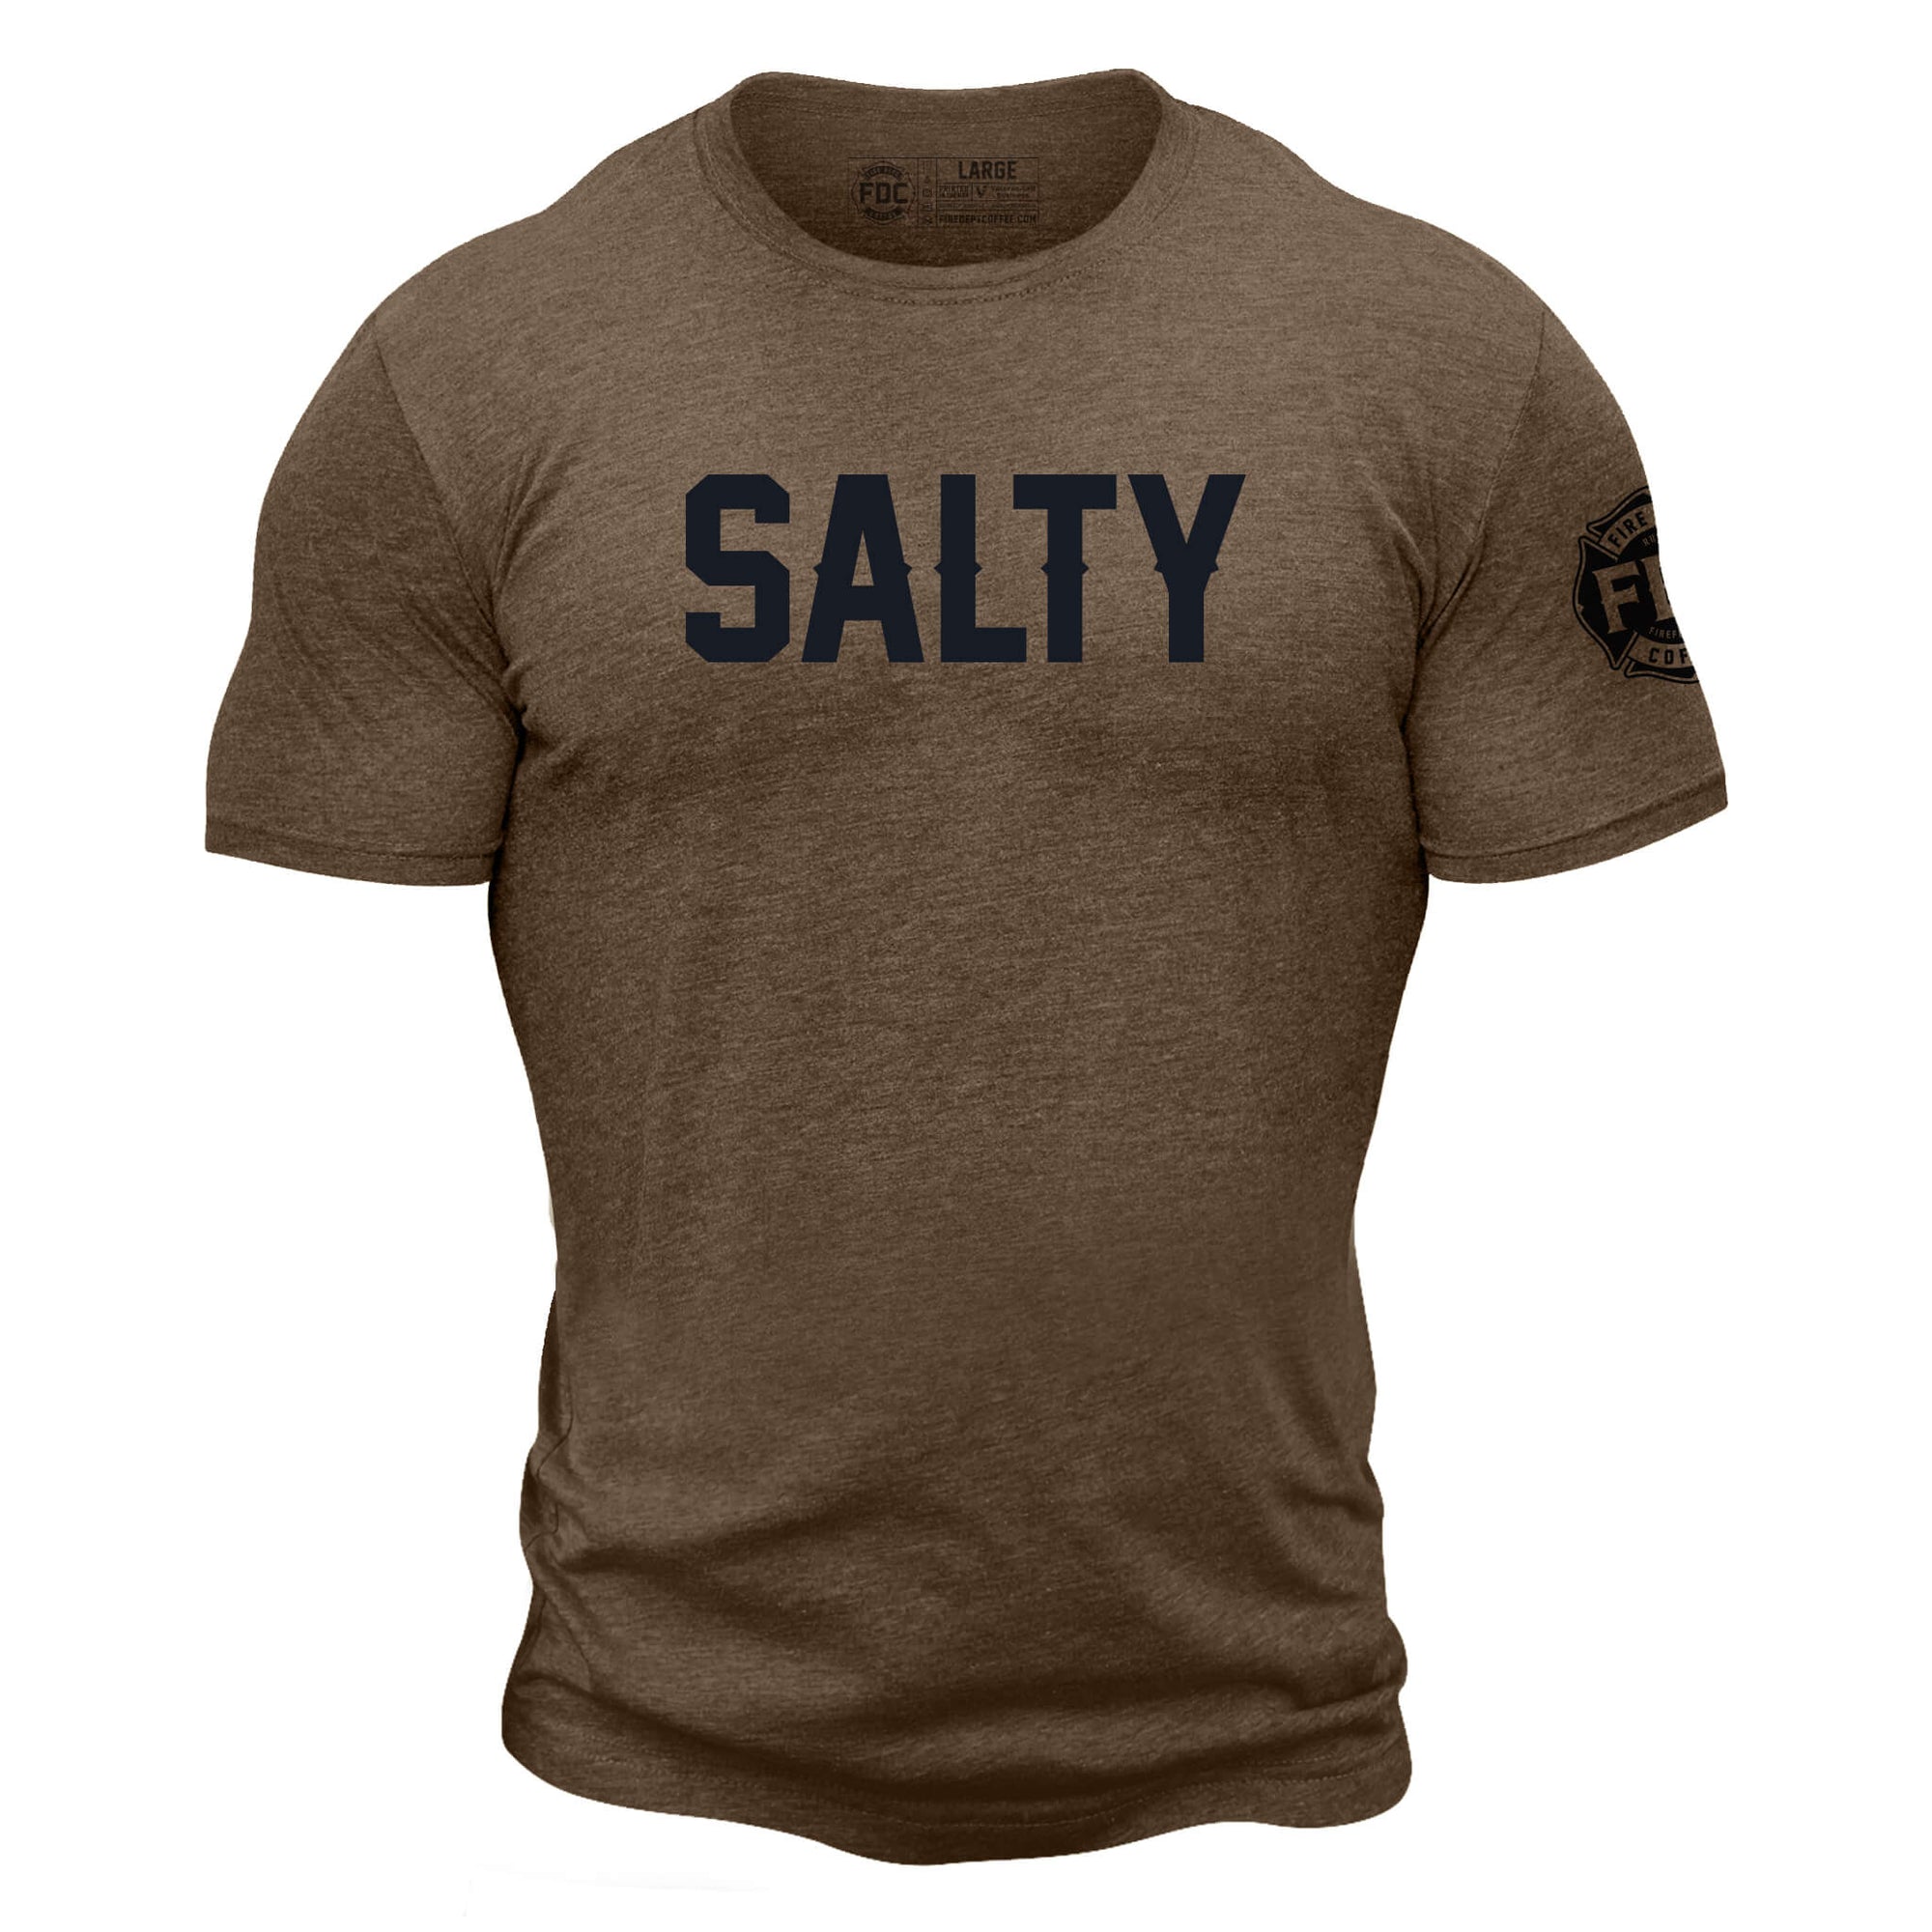 A heathered, espresso color t shirt with the text "Salty" across the chest in large, black letters. The black FDC maltese cross is on the sleeve.